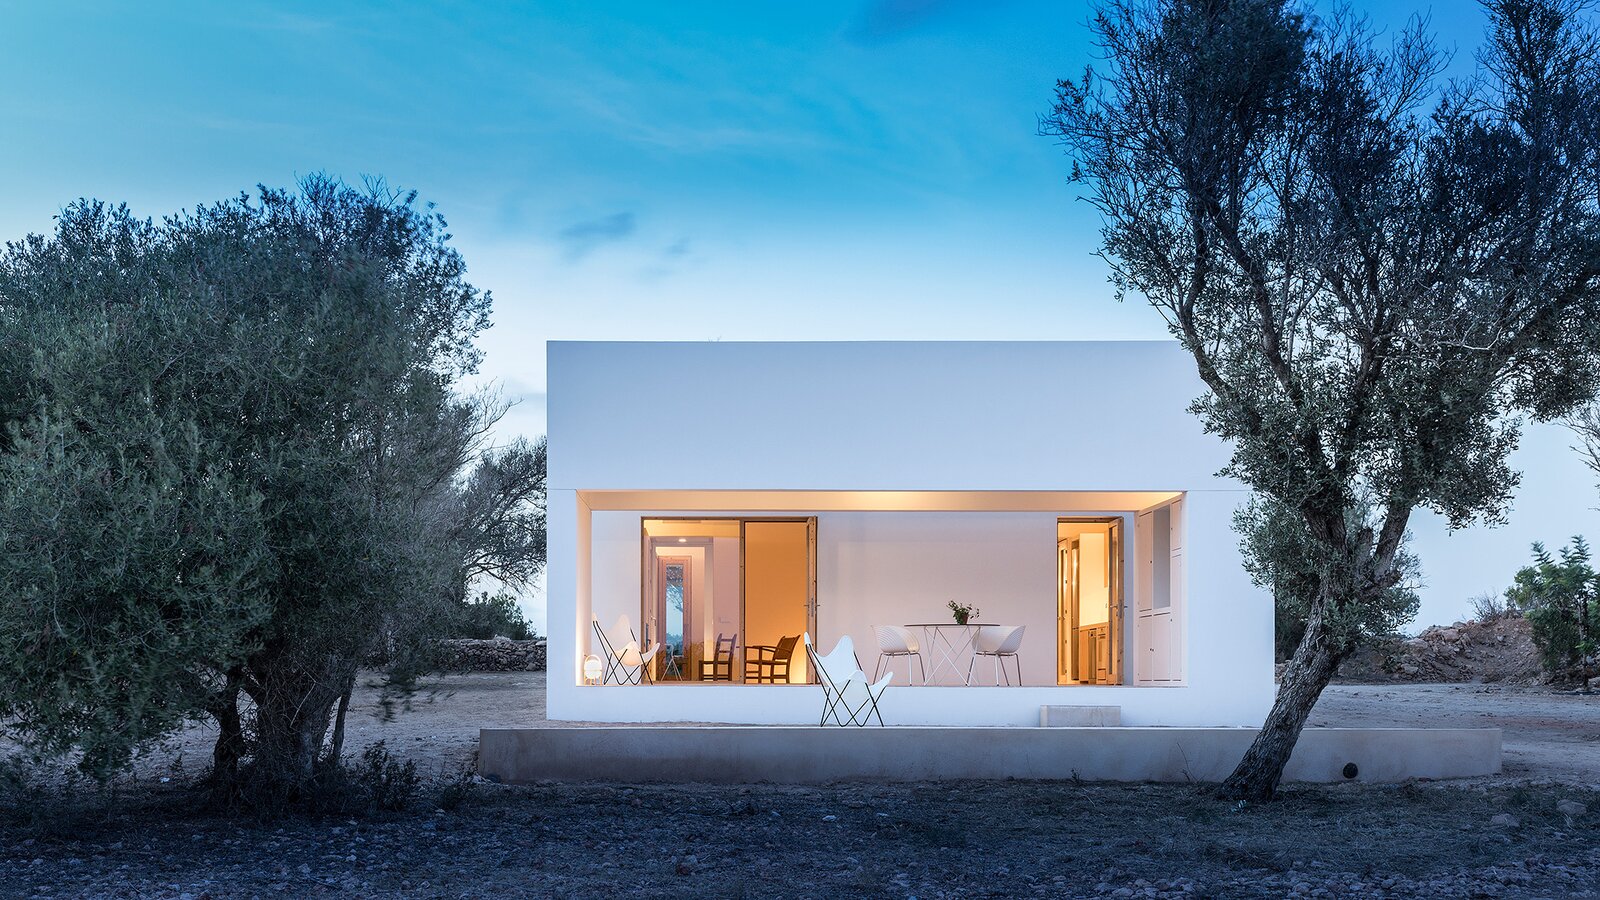 A Breezy, Barrel-Vaulted Home Springs Up on a Balearic Isle